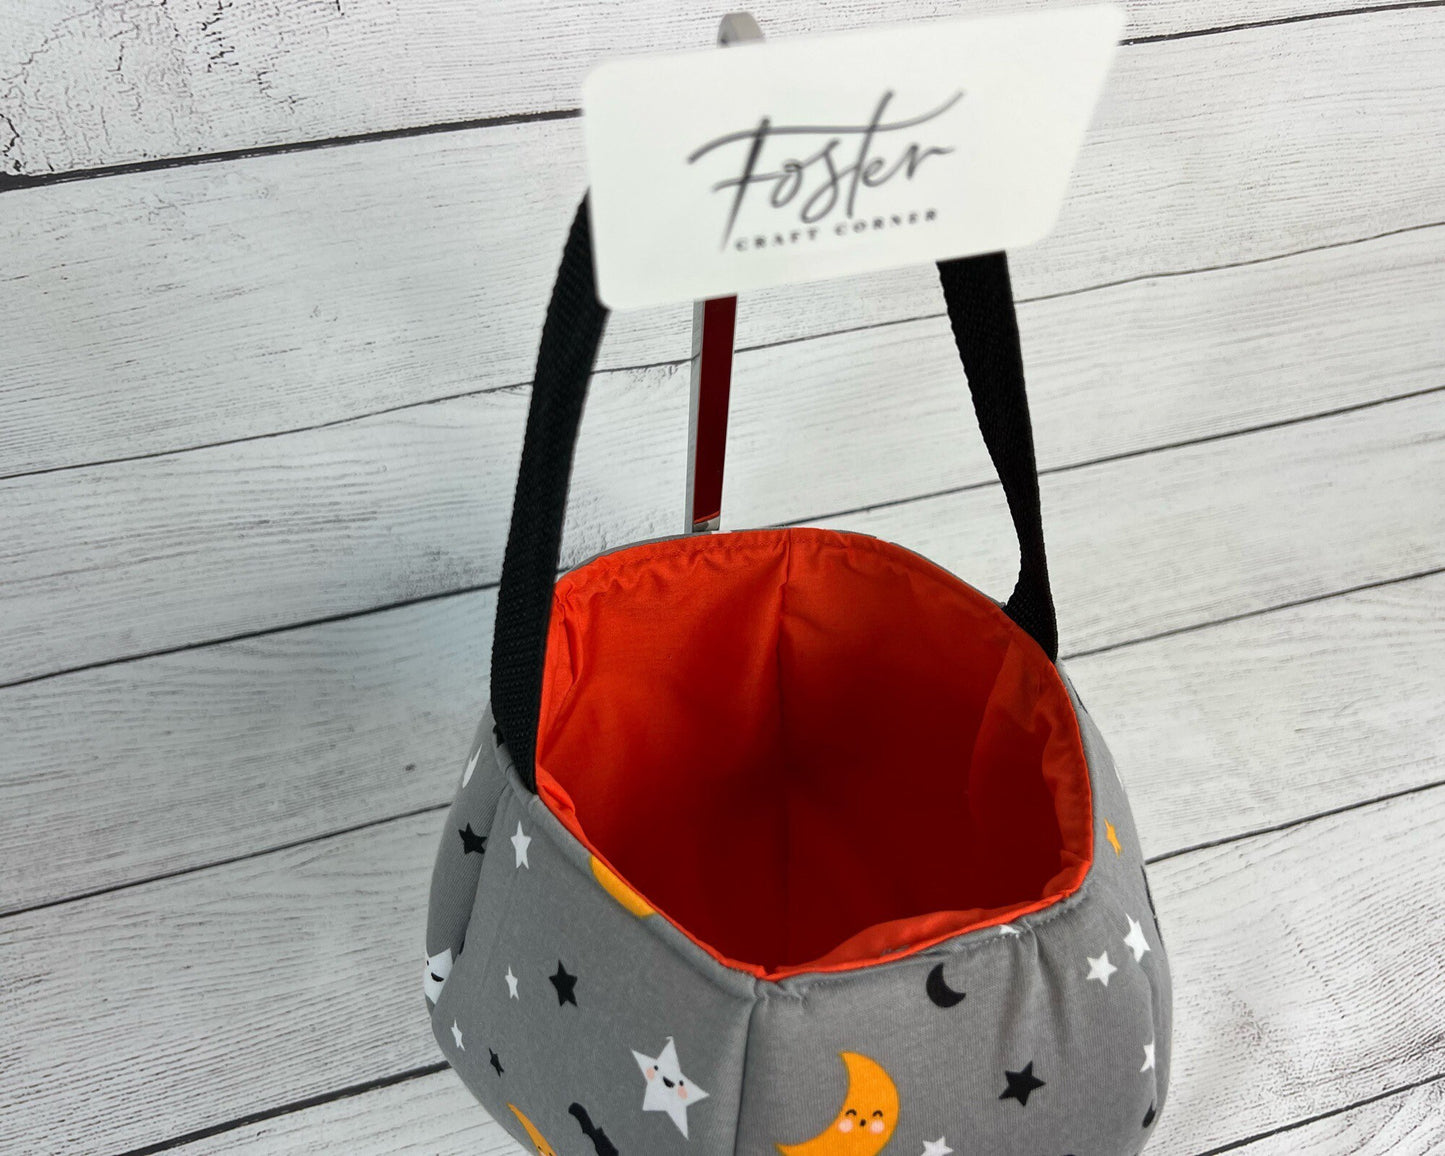 Moon, Stars and Bats Halloween Tote Bag - Grey Halloween - Soft Bag - Kids - Smile - Everyday - Holiday - Easter - Halloween - Party - Gift